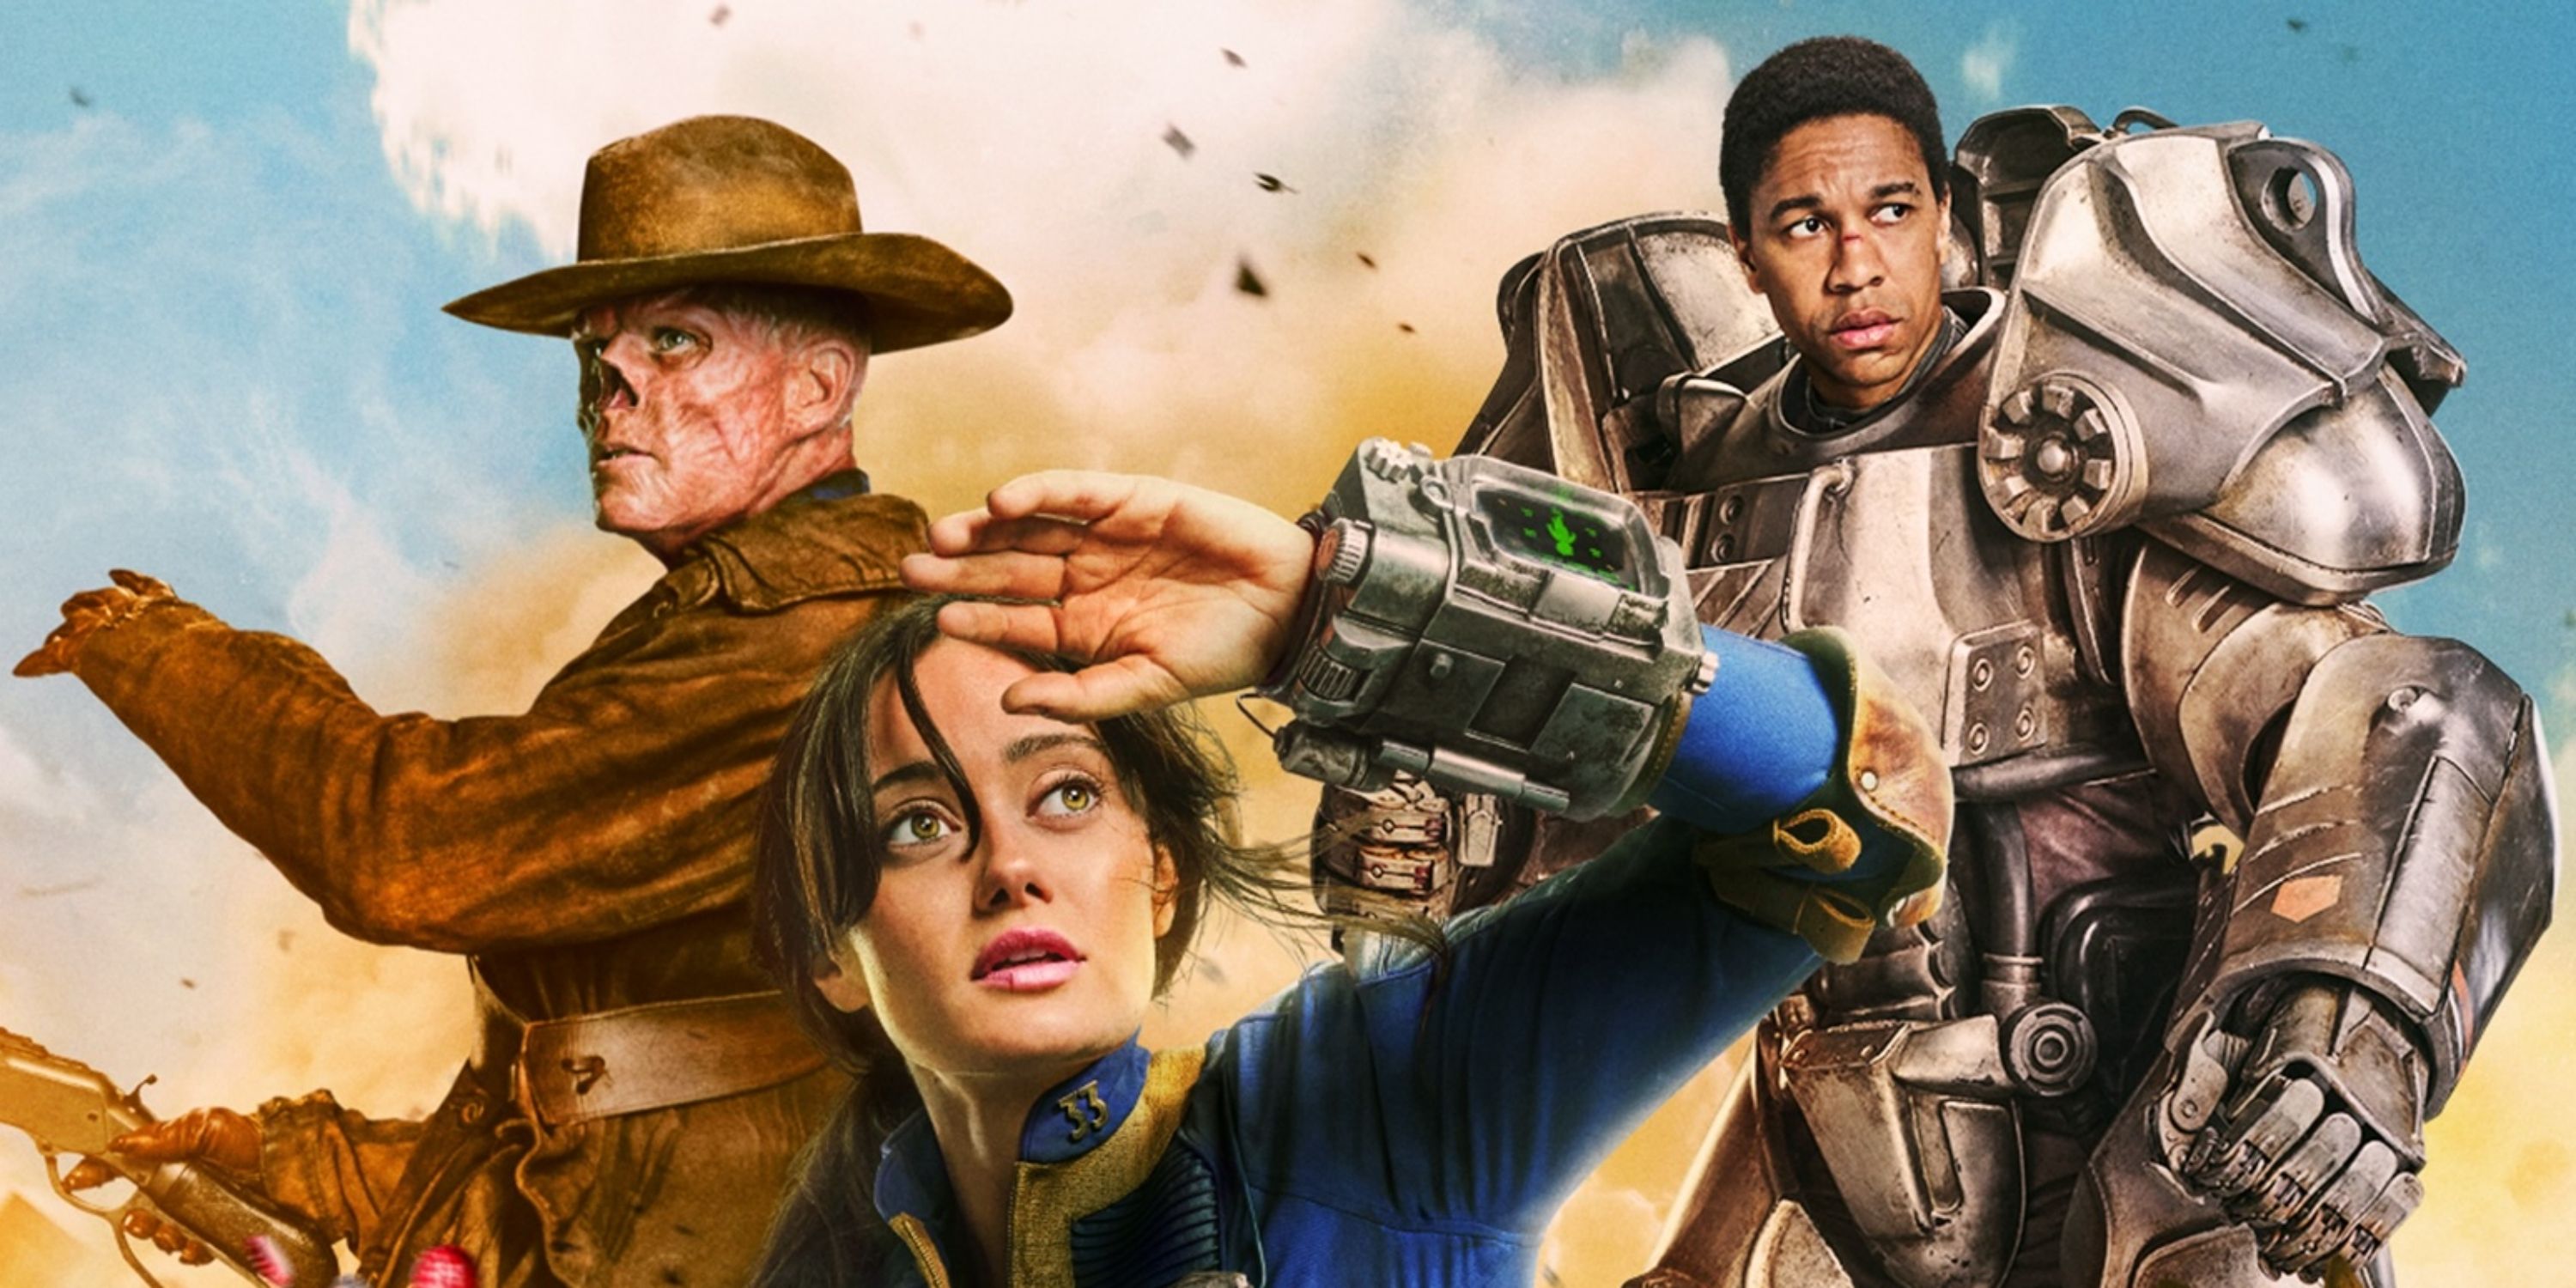 Poster artwork with Walton Goggins as The Goul, Ella Purnell as Lucy, and Aaron Moten as Maximus in Fallout